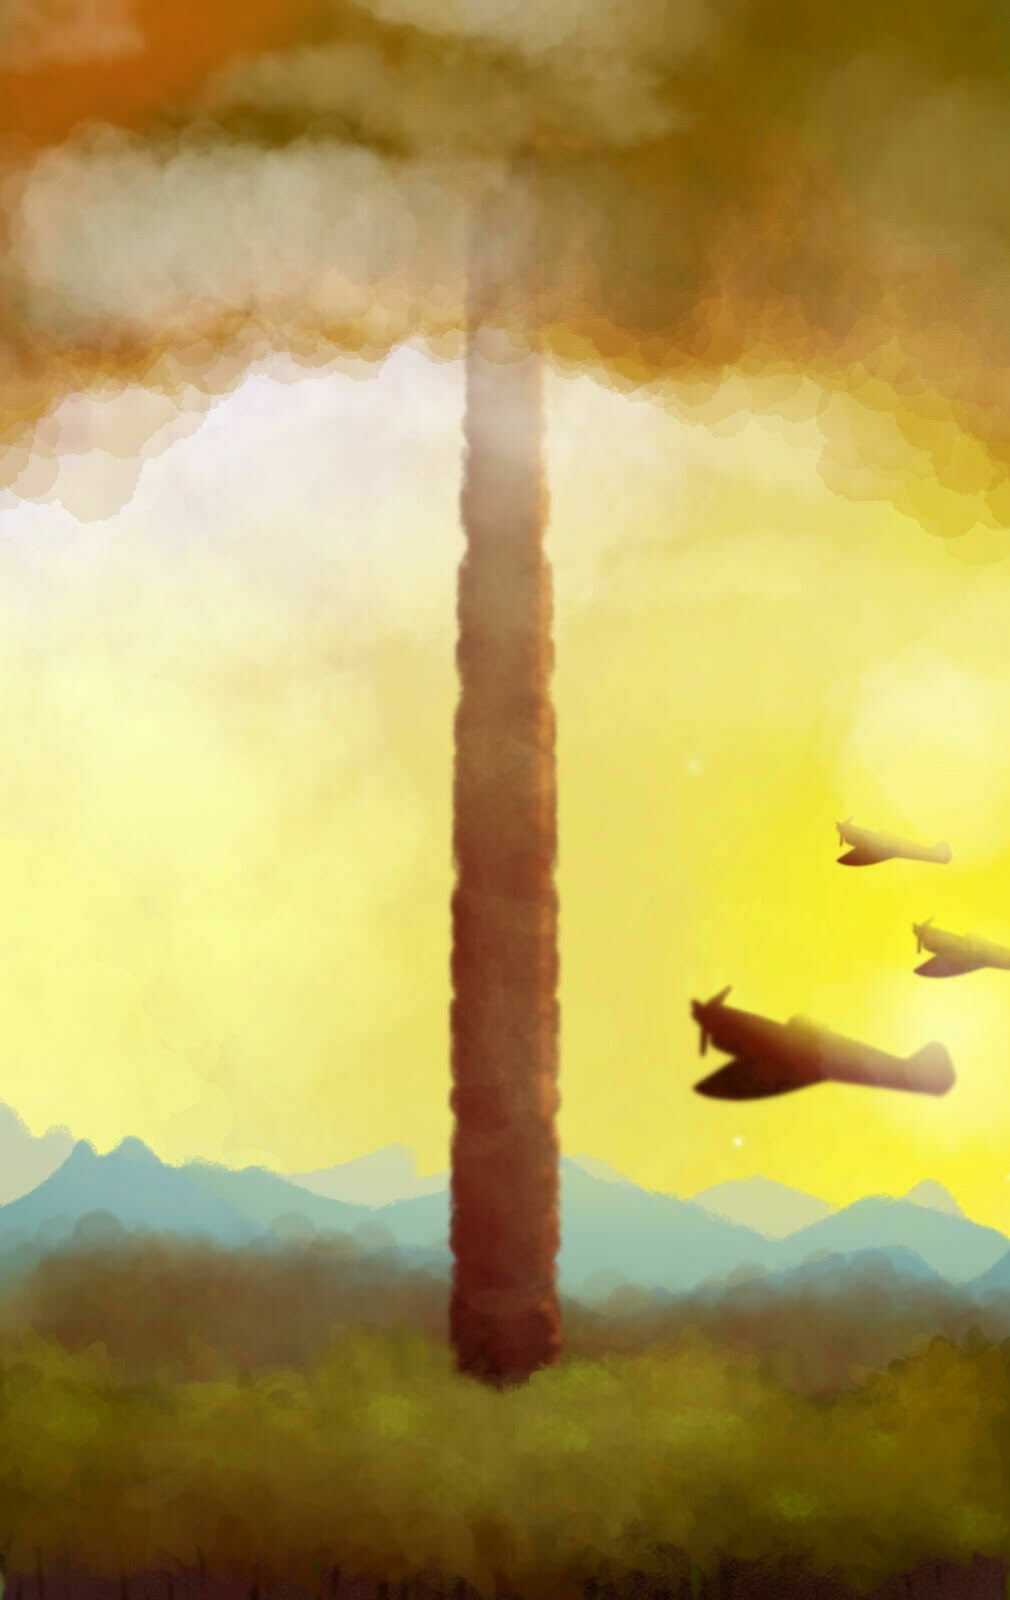 A painting that depicts a high, stone-like tower touching the clouds above, as three nearby airplanes hover around the structure.